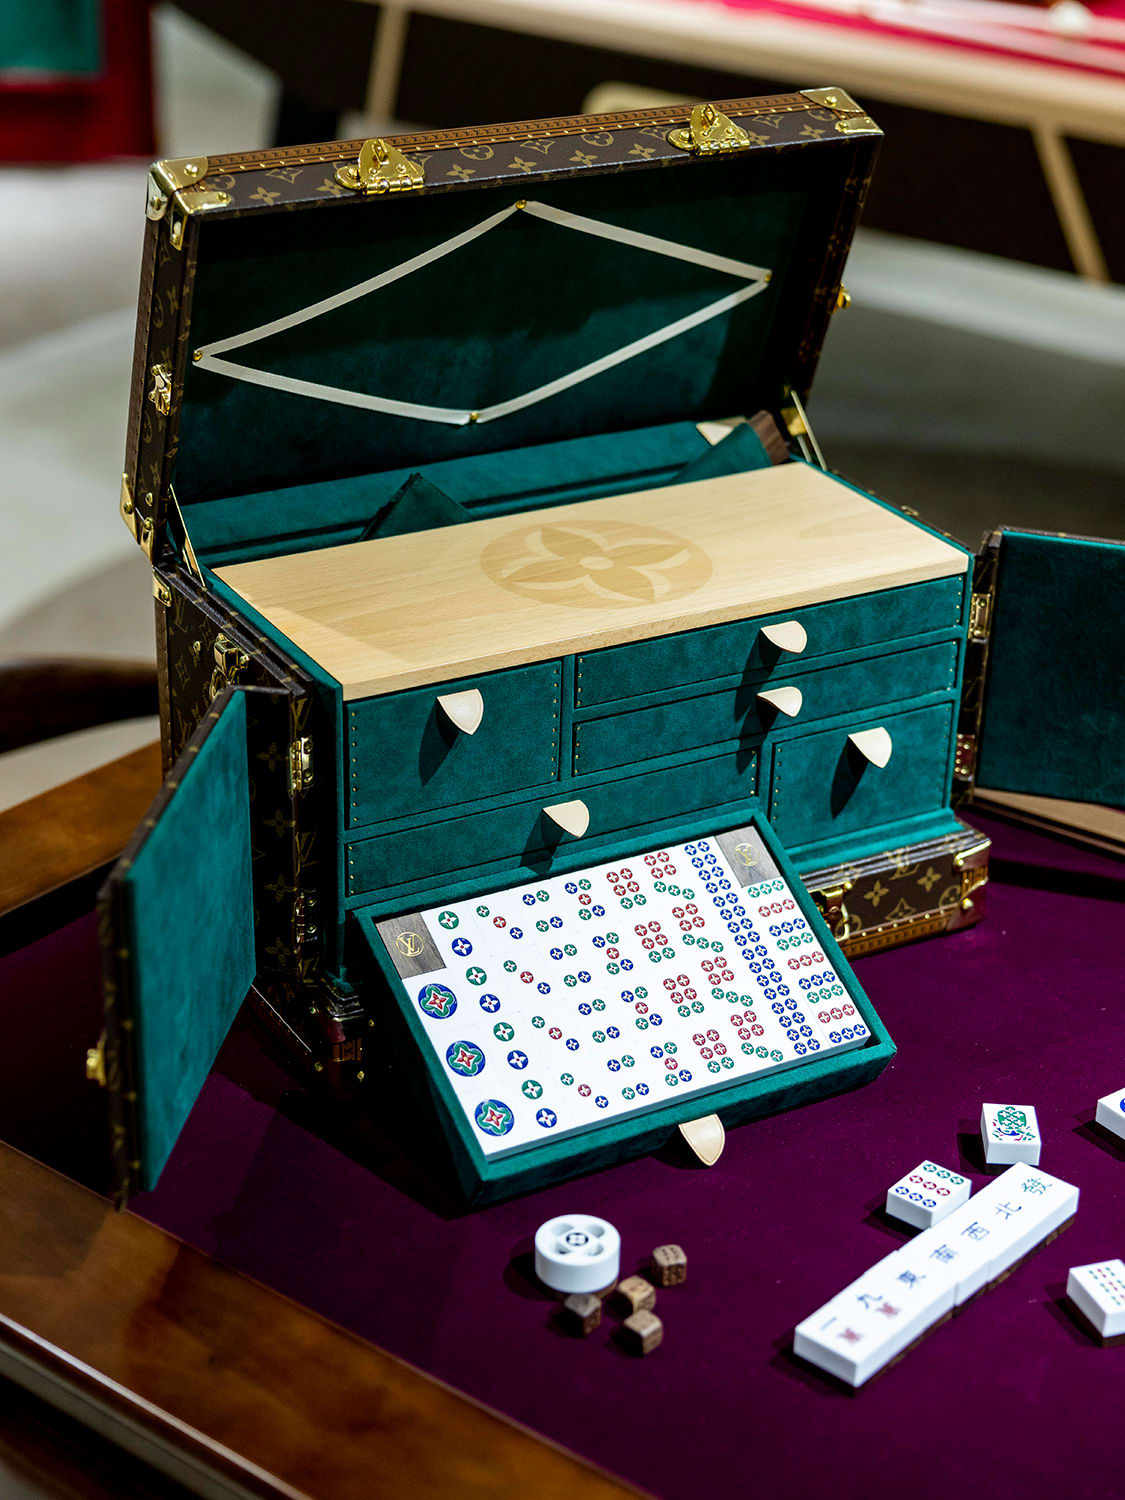 LUXE LOUIS VUITTON MAHJONG SET WITH ENGRAVED WOODEN TILES - Shout